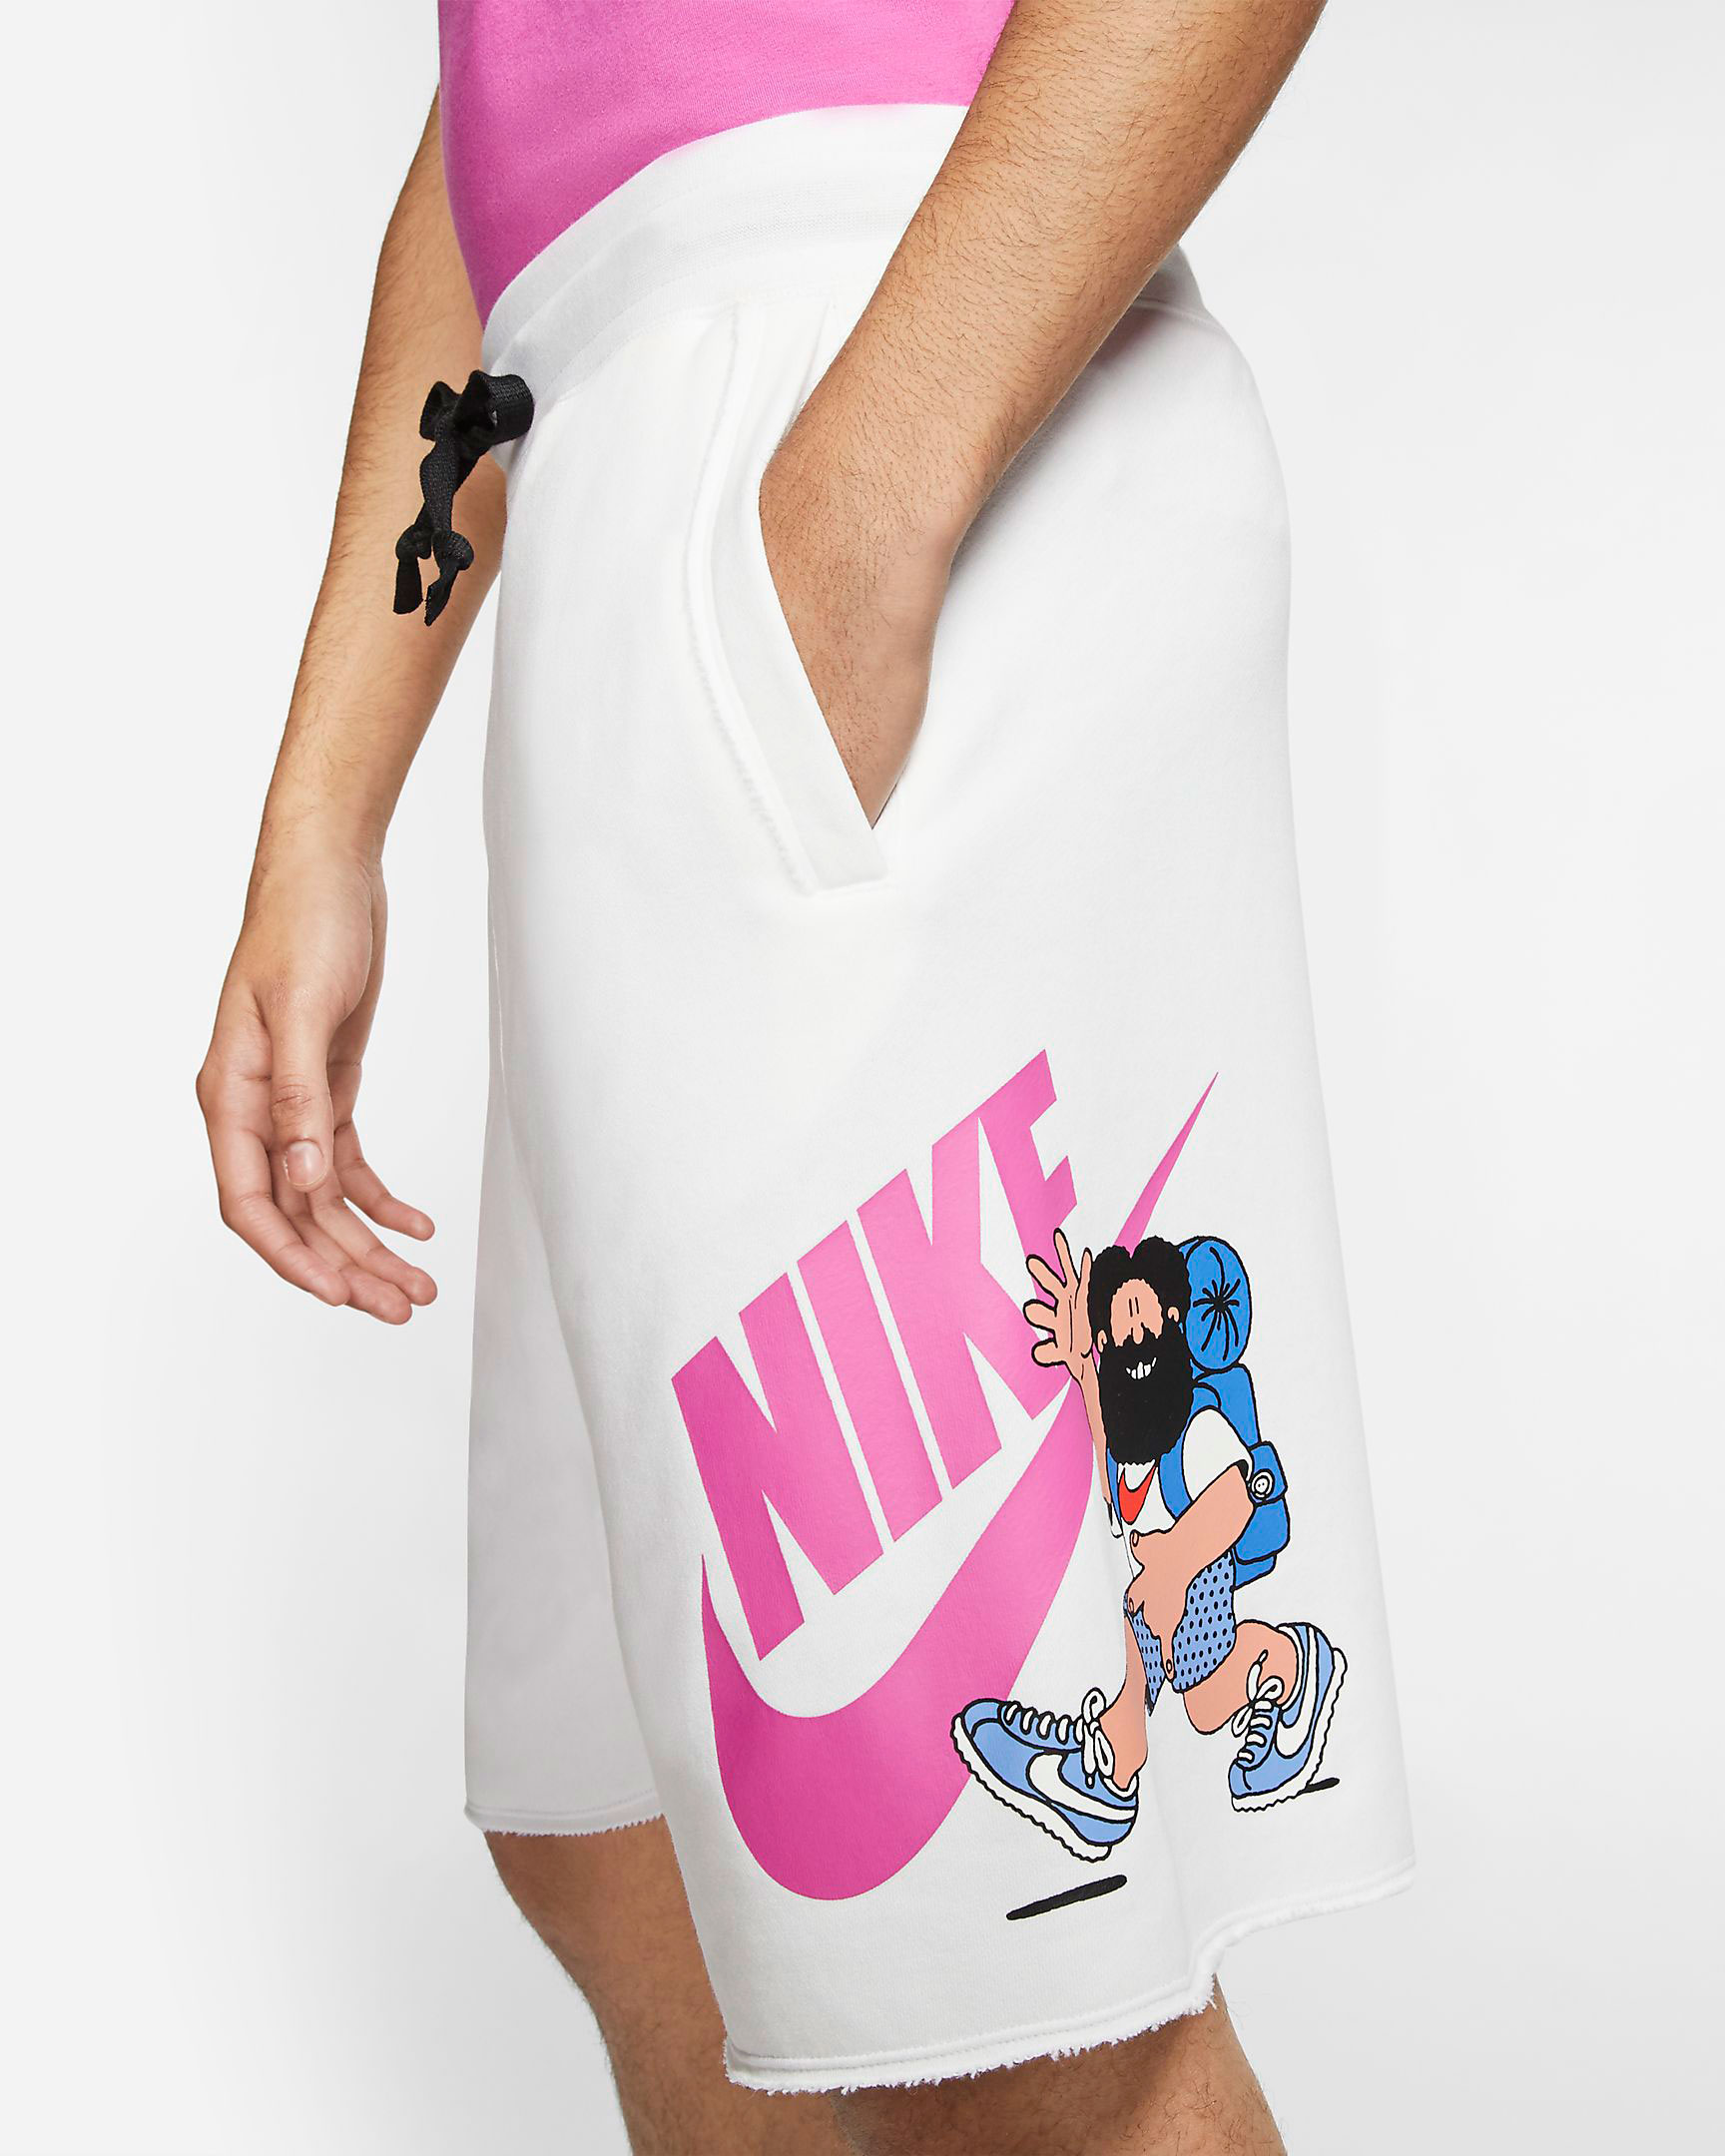 nike sweat shorts with cartoon characters